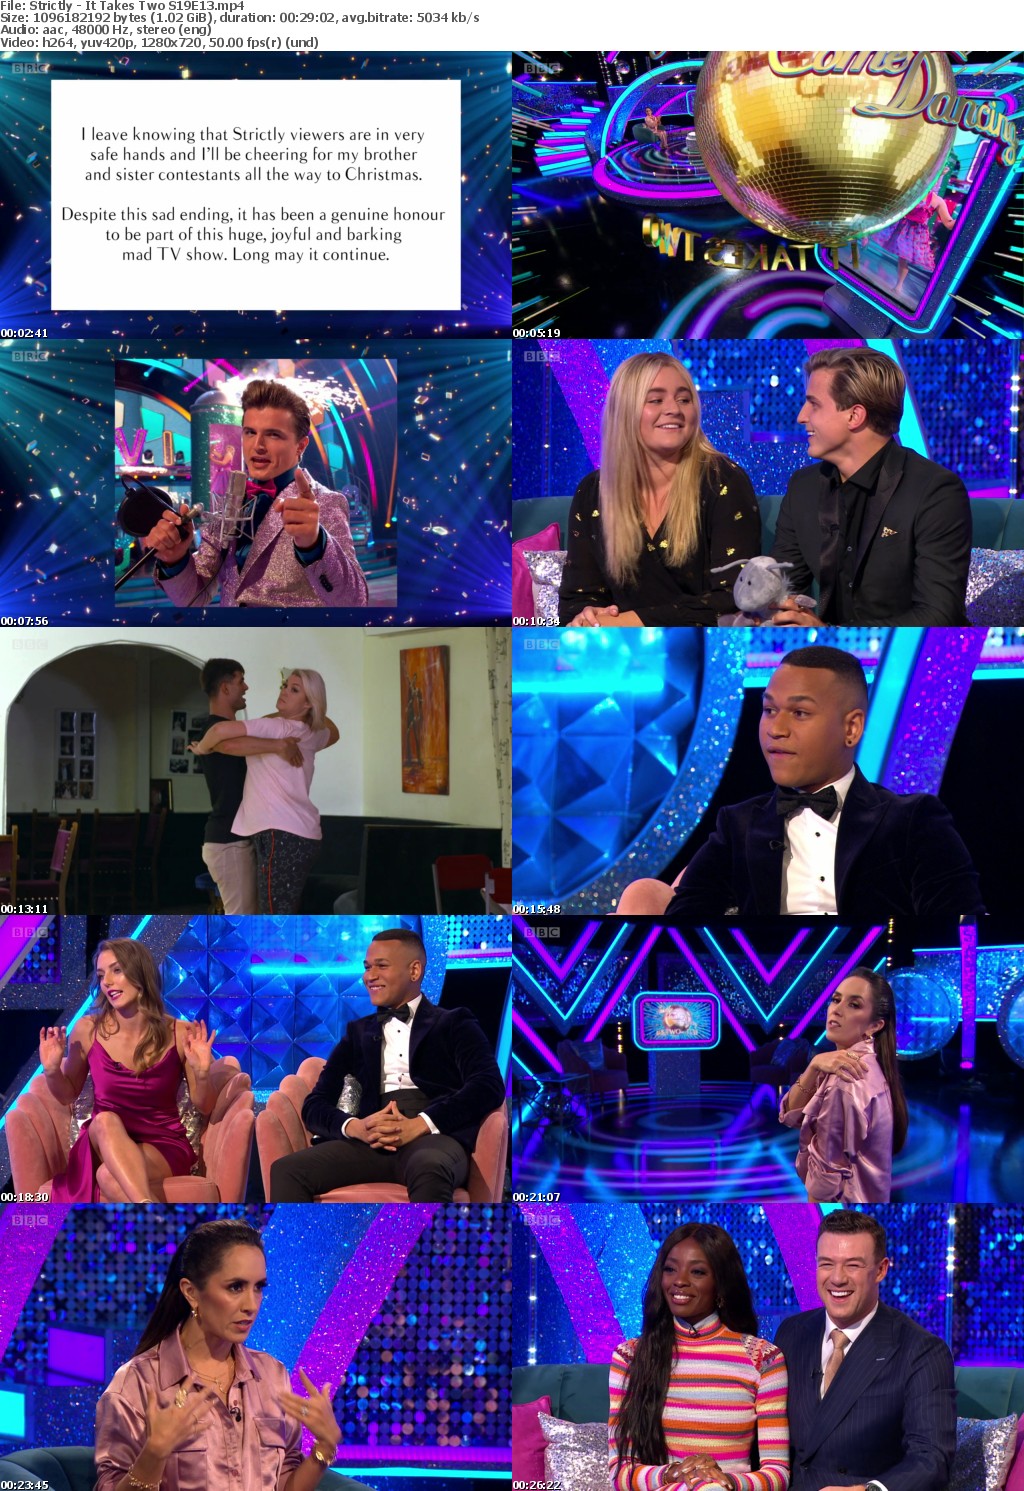 Strictly - It Takes Two S19E13